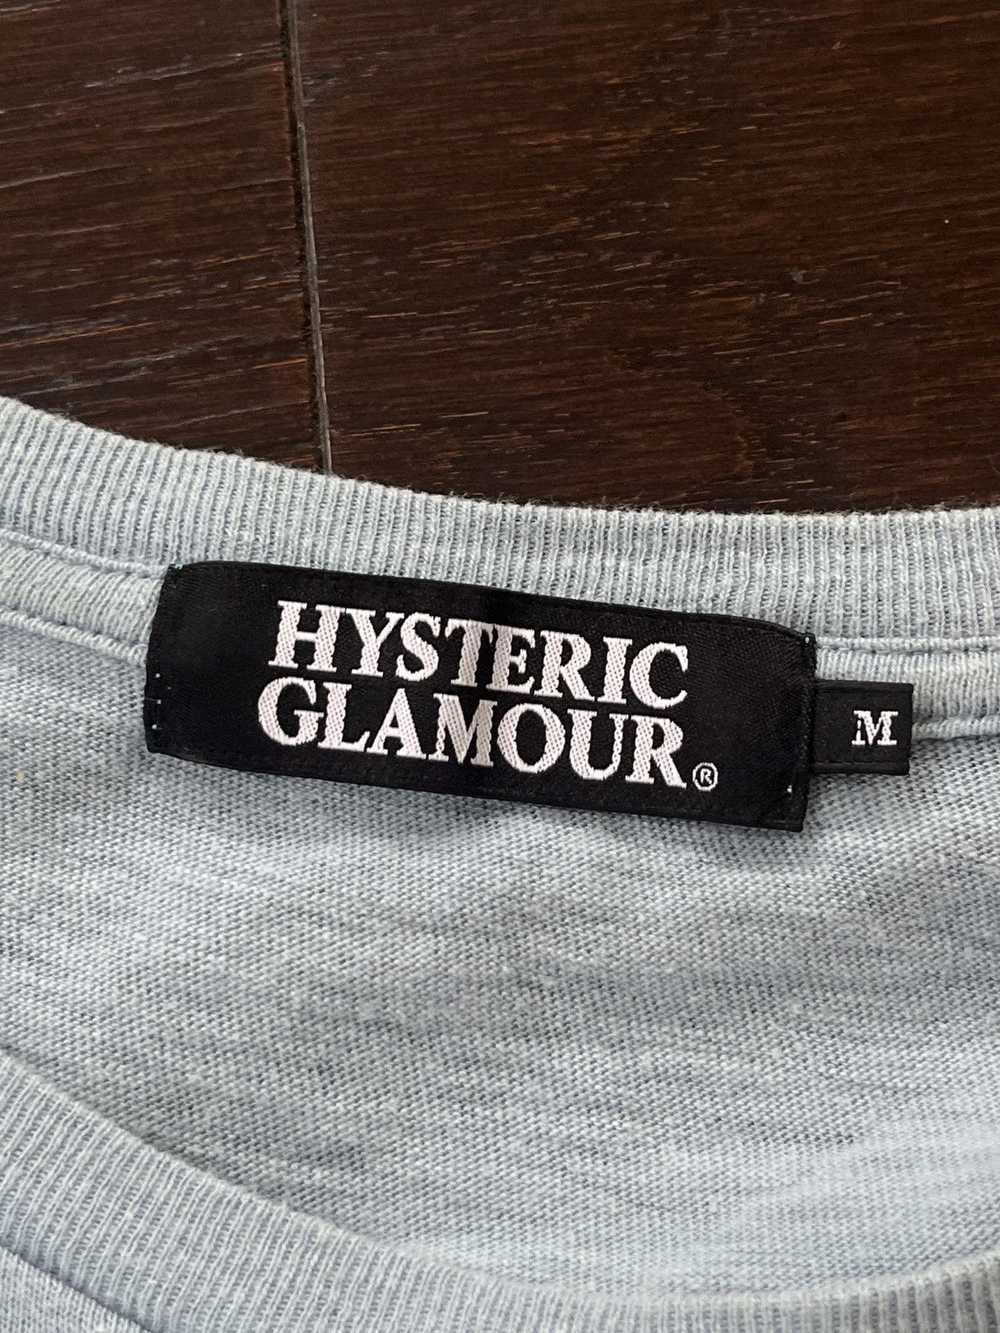 Hysteric Glamour × Japanese Brand × Streetwear Y2… - image 4